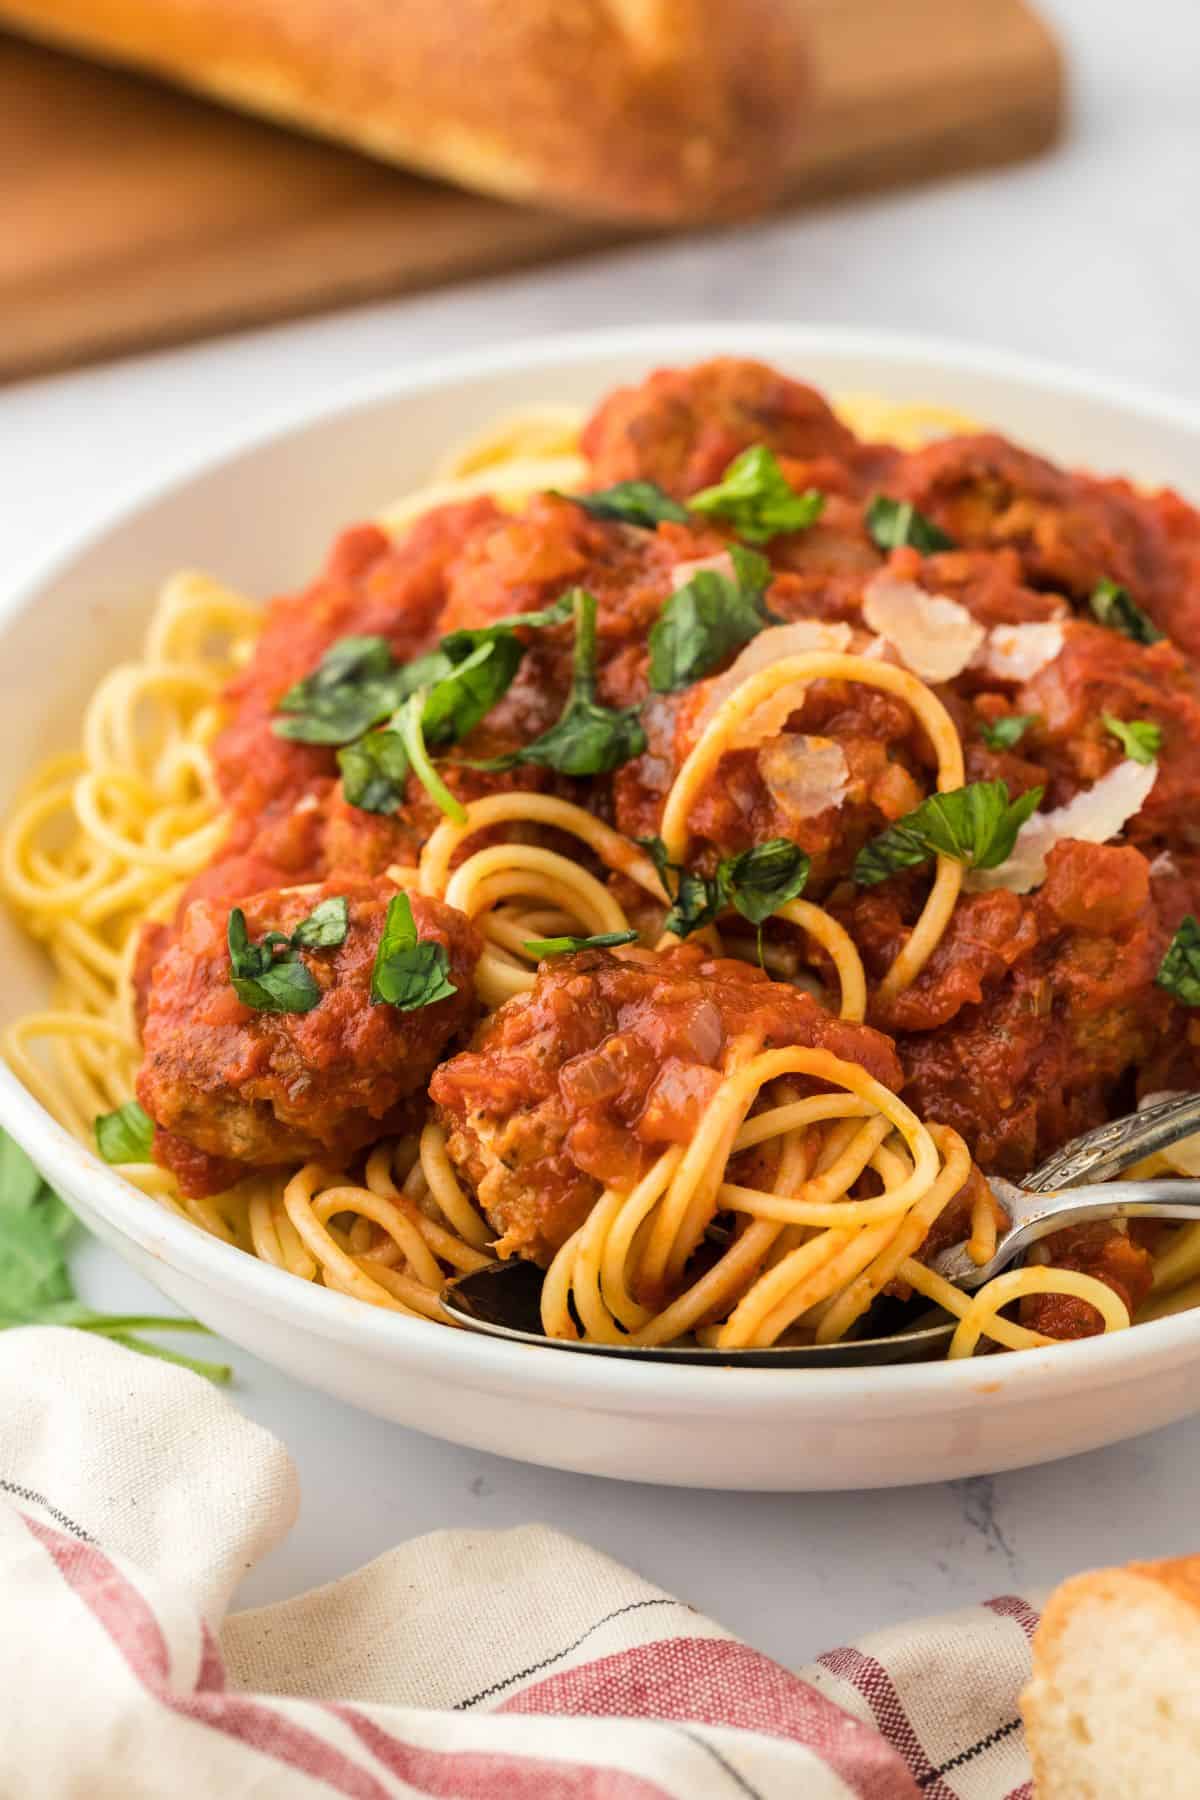 A bowl of spaghetti and meatballs on the table topped with a sprinkle of parmesan and herbs.